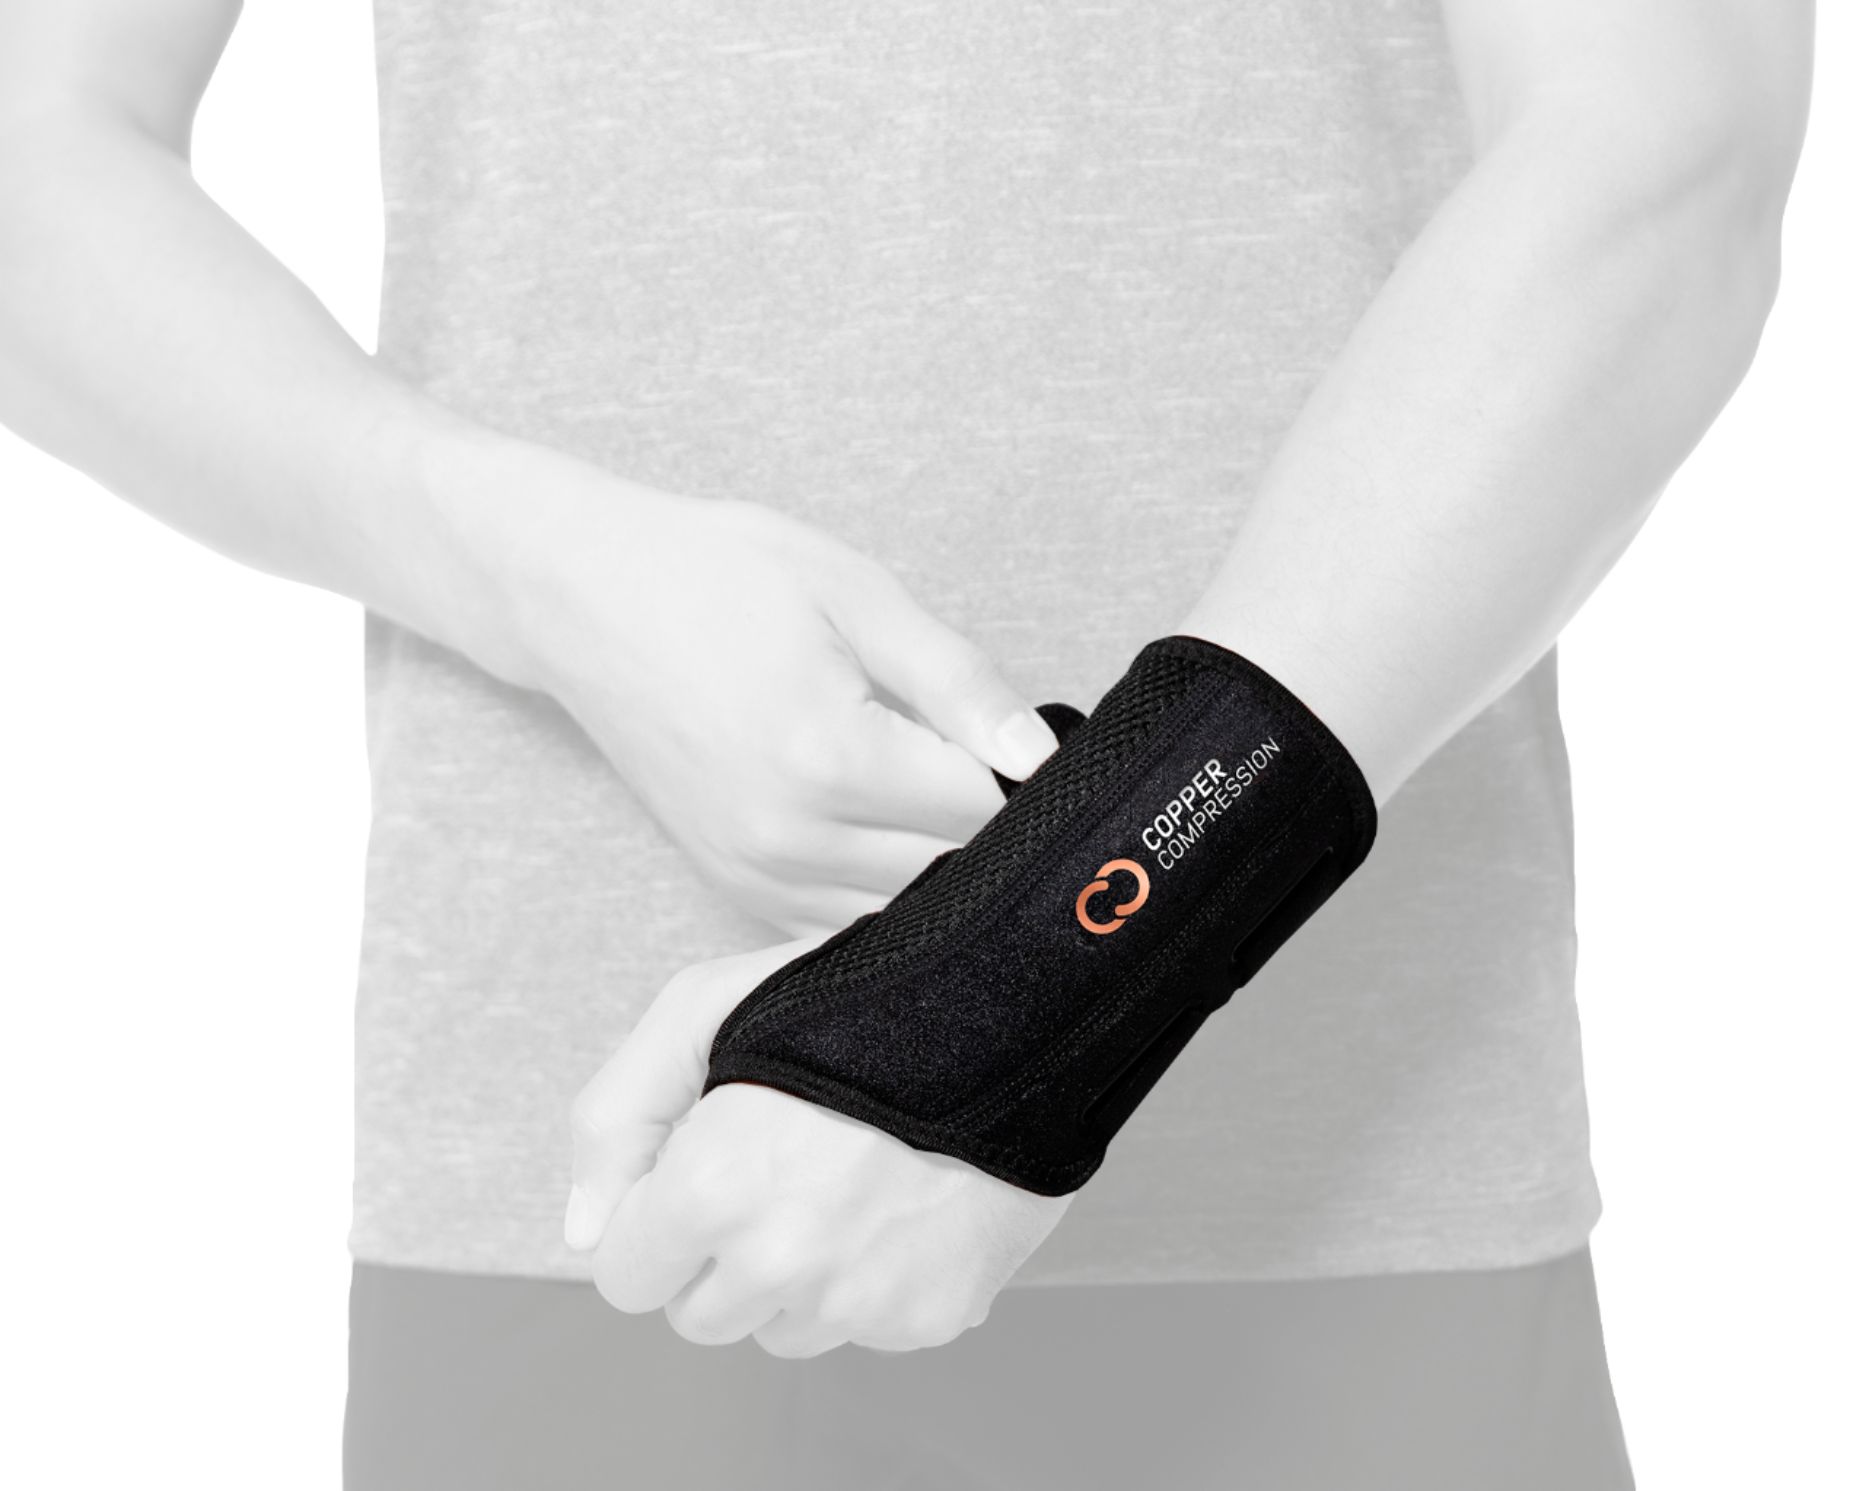 Stylish Copper Fit Wrist Brace for Ultimate Support